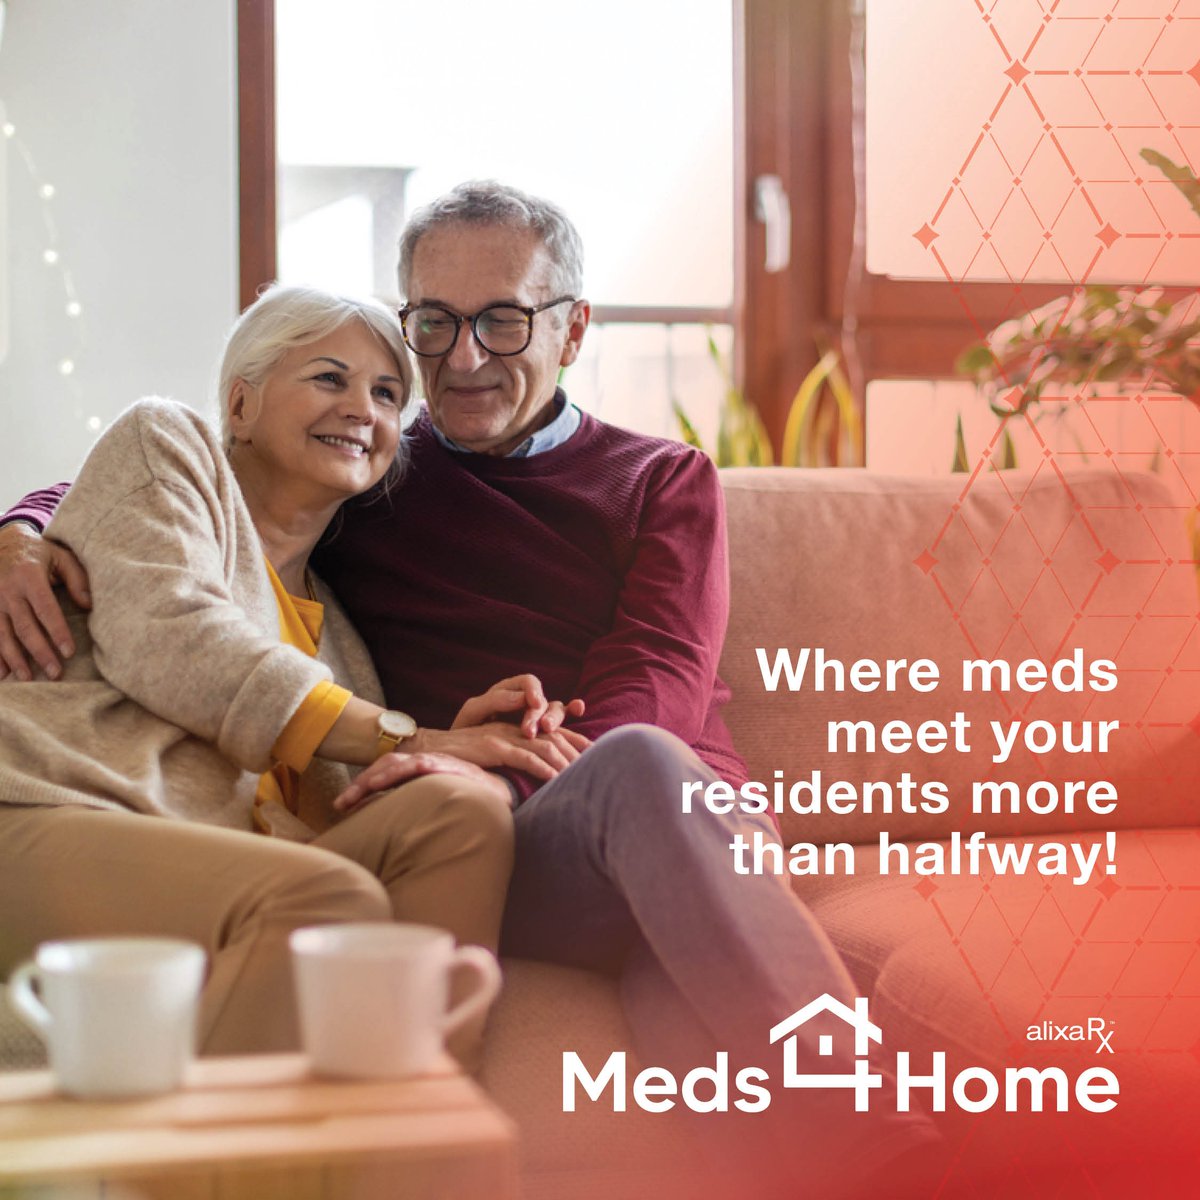 AlixaRx's Meds 4 Home program helps ensure a smooth transition home, reduces the risk of hospital readmission and allows patients to adjust and recover.

Visit:
 AlixaRx.com

#AlixaRx #PharmacyServices #LTC #Meds4Home #ReduceRehospitalizations